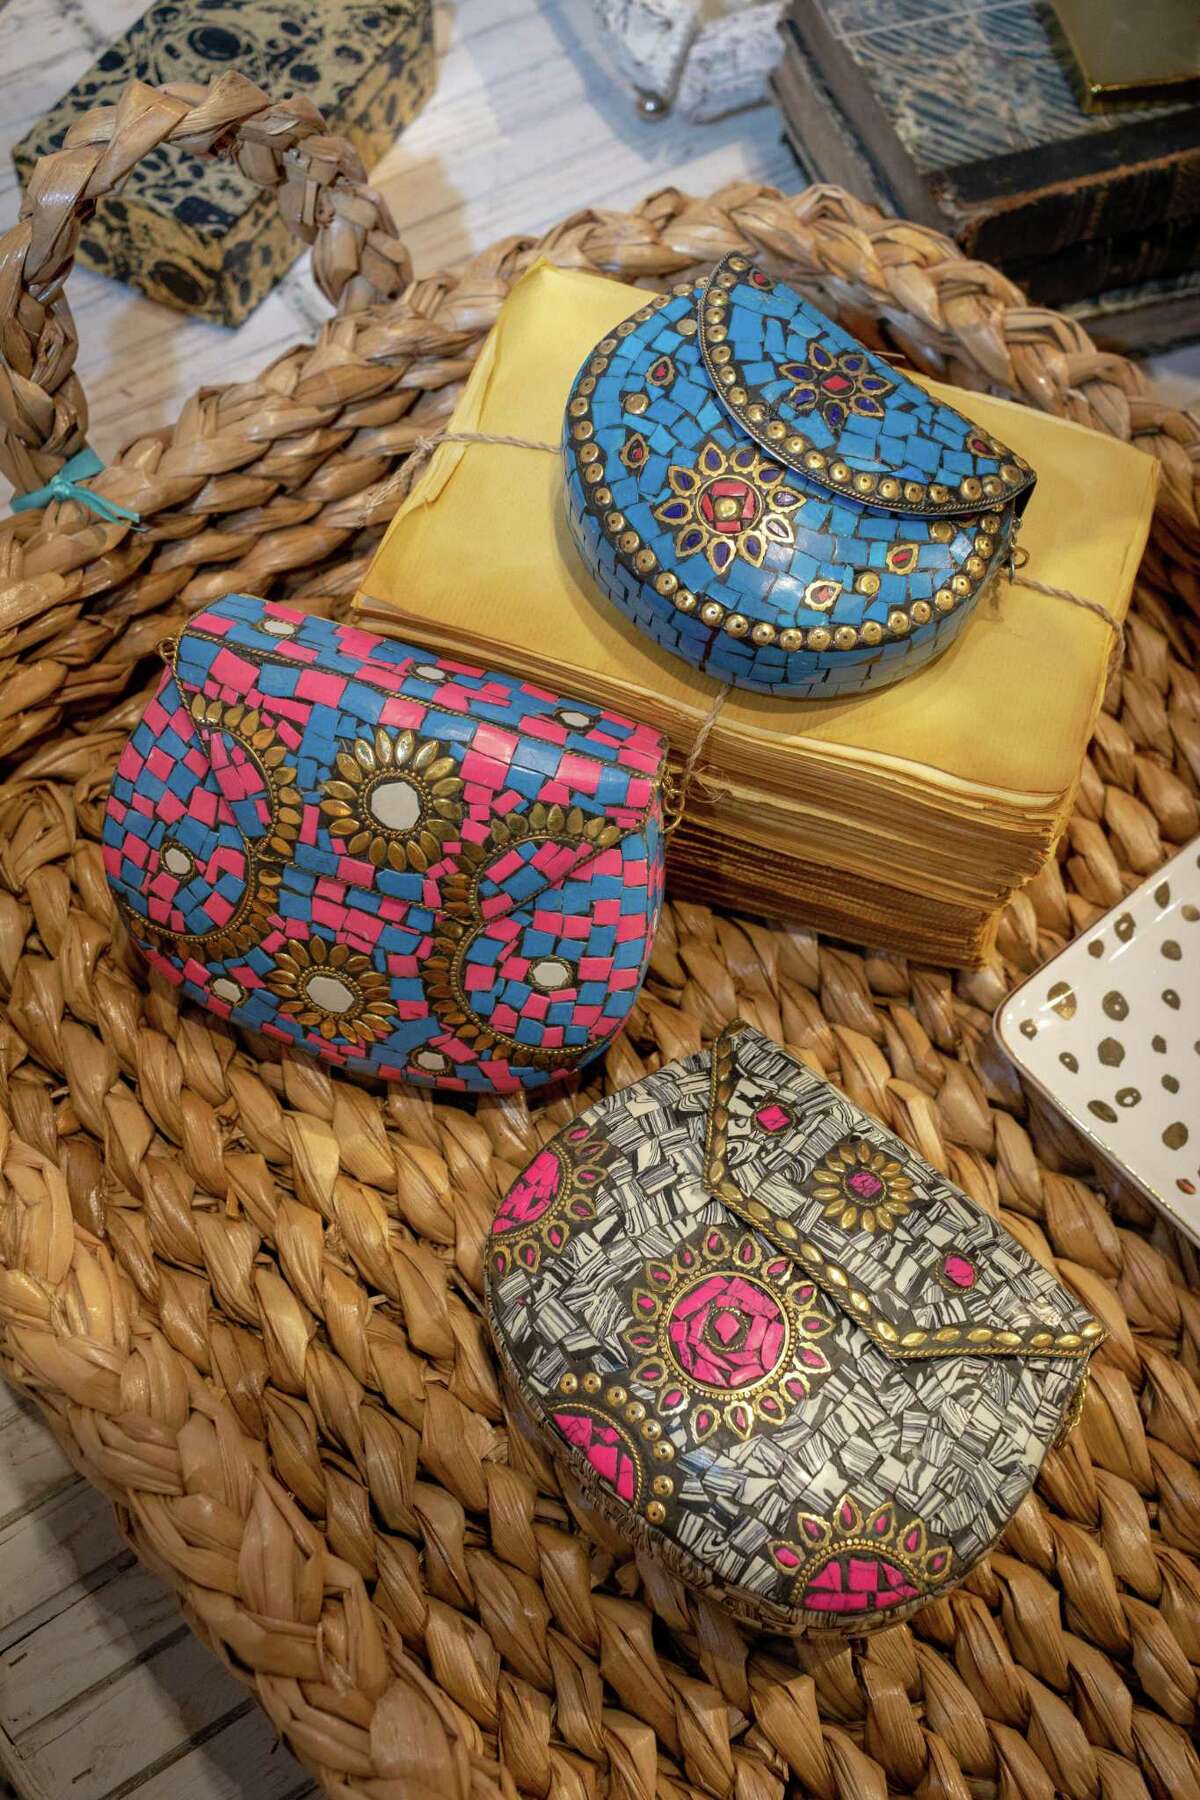 These hard-sided clutches are inlaid with colorful stones and brass metal work and were made in Bhutan in the Himalayas. They can be found in the Laurier Blanc antiques and decor store on Bissonet in Houston.